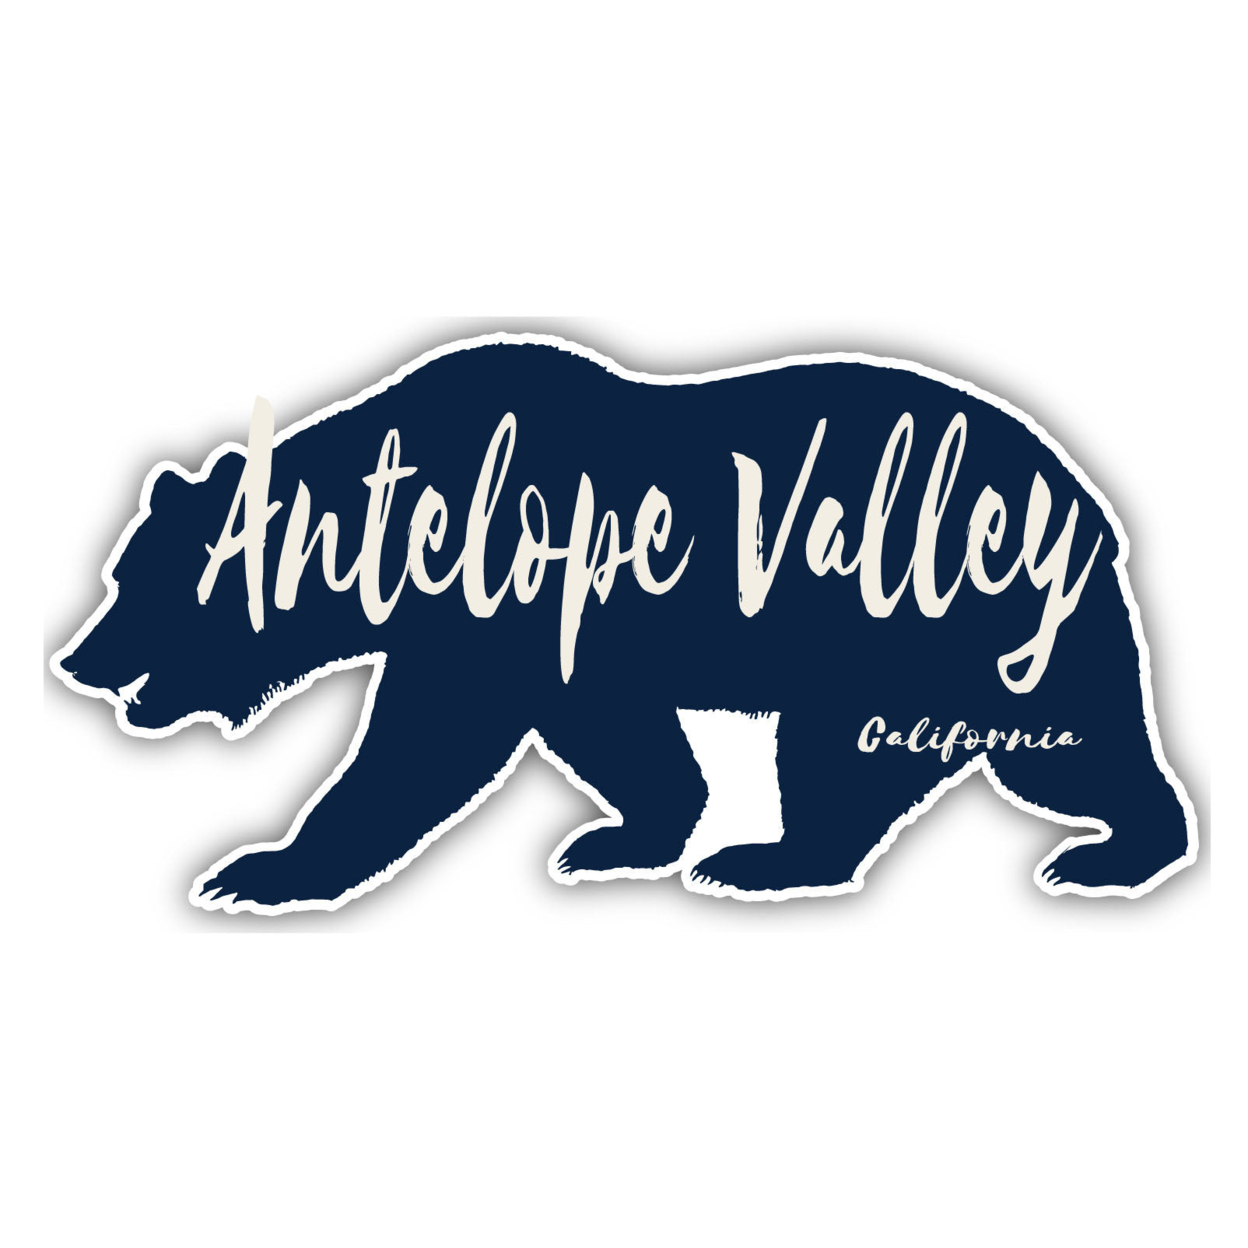 Antelope Valley California Souvenir Decorative Stickers (Choose Theme And Size) - Single Unit, 4-Inch, Camp Life